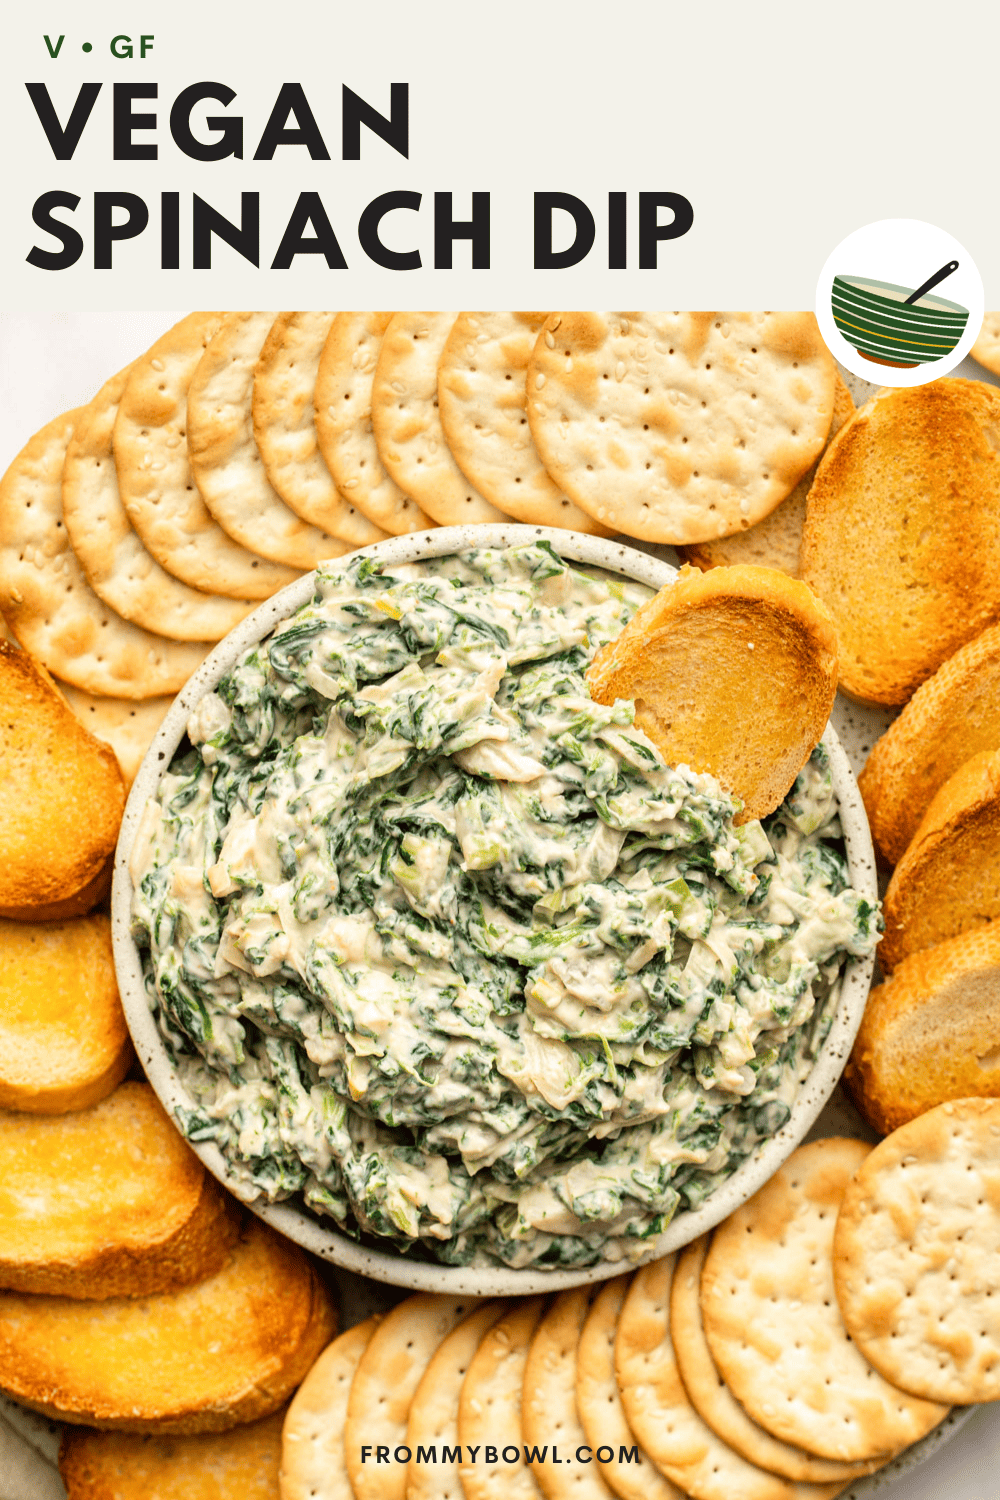 vegan spinach dip served in a white bowl with crackers and toasted crostini, with a single crostini dug in the spinach dip bowl